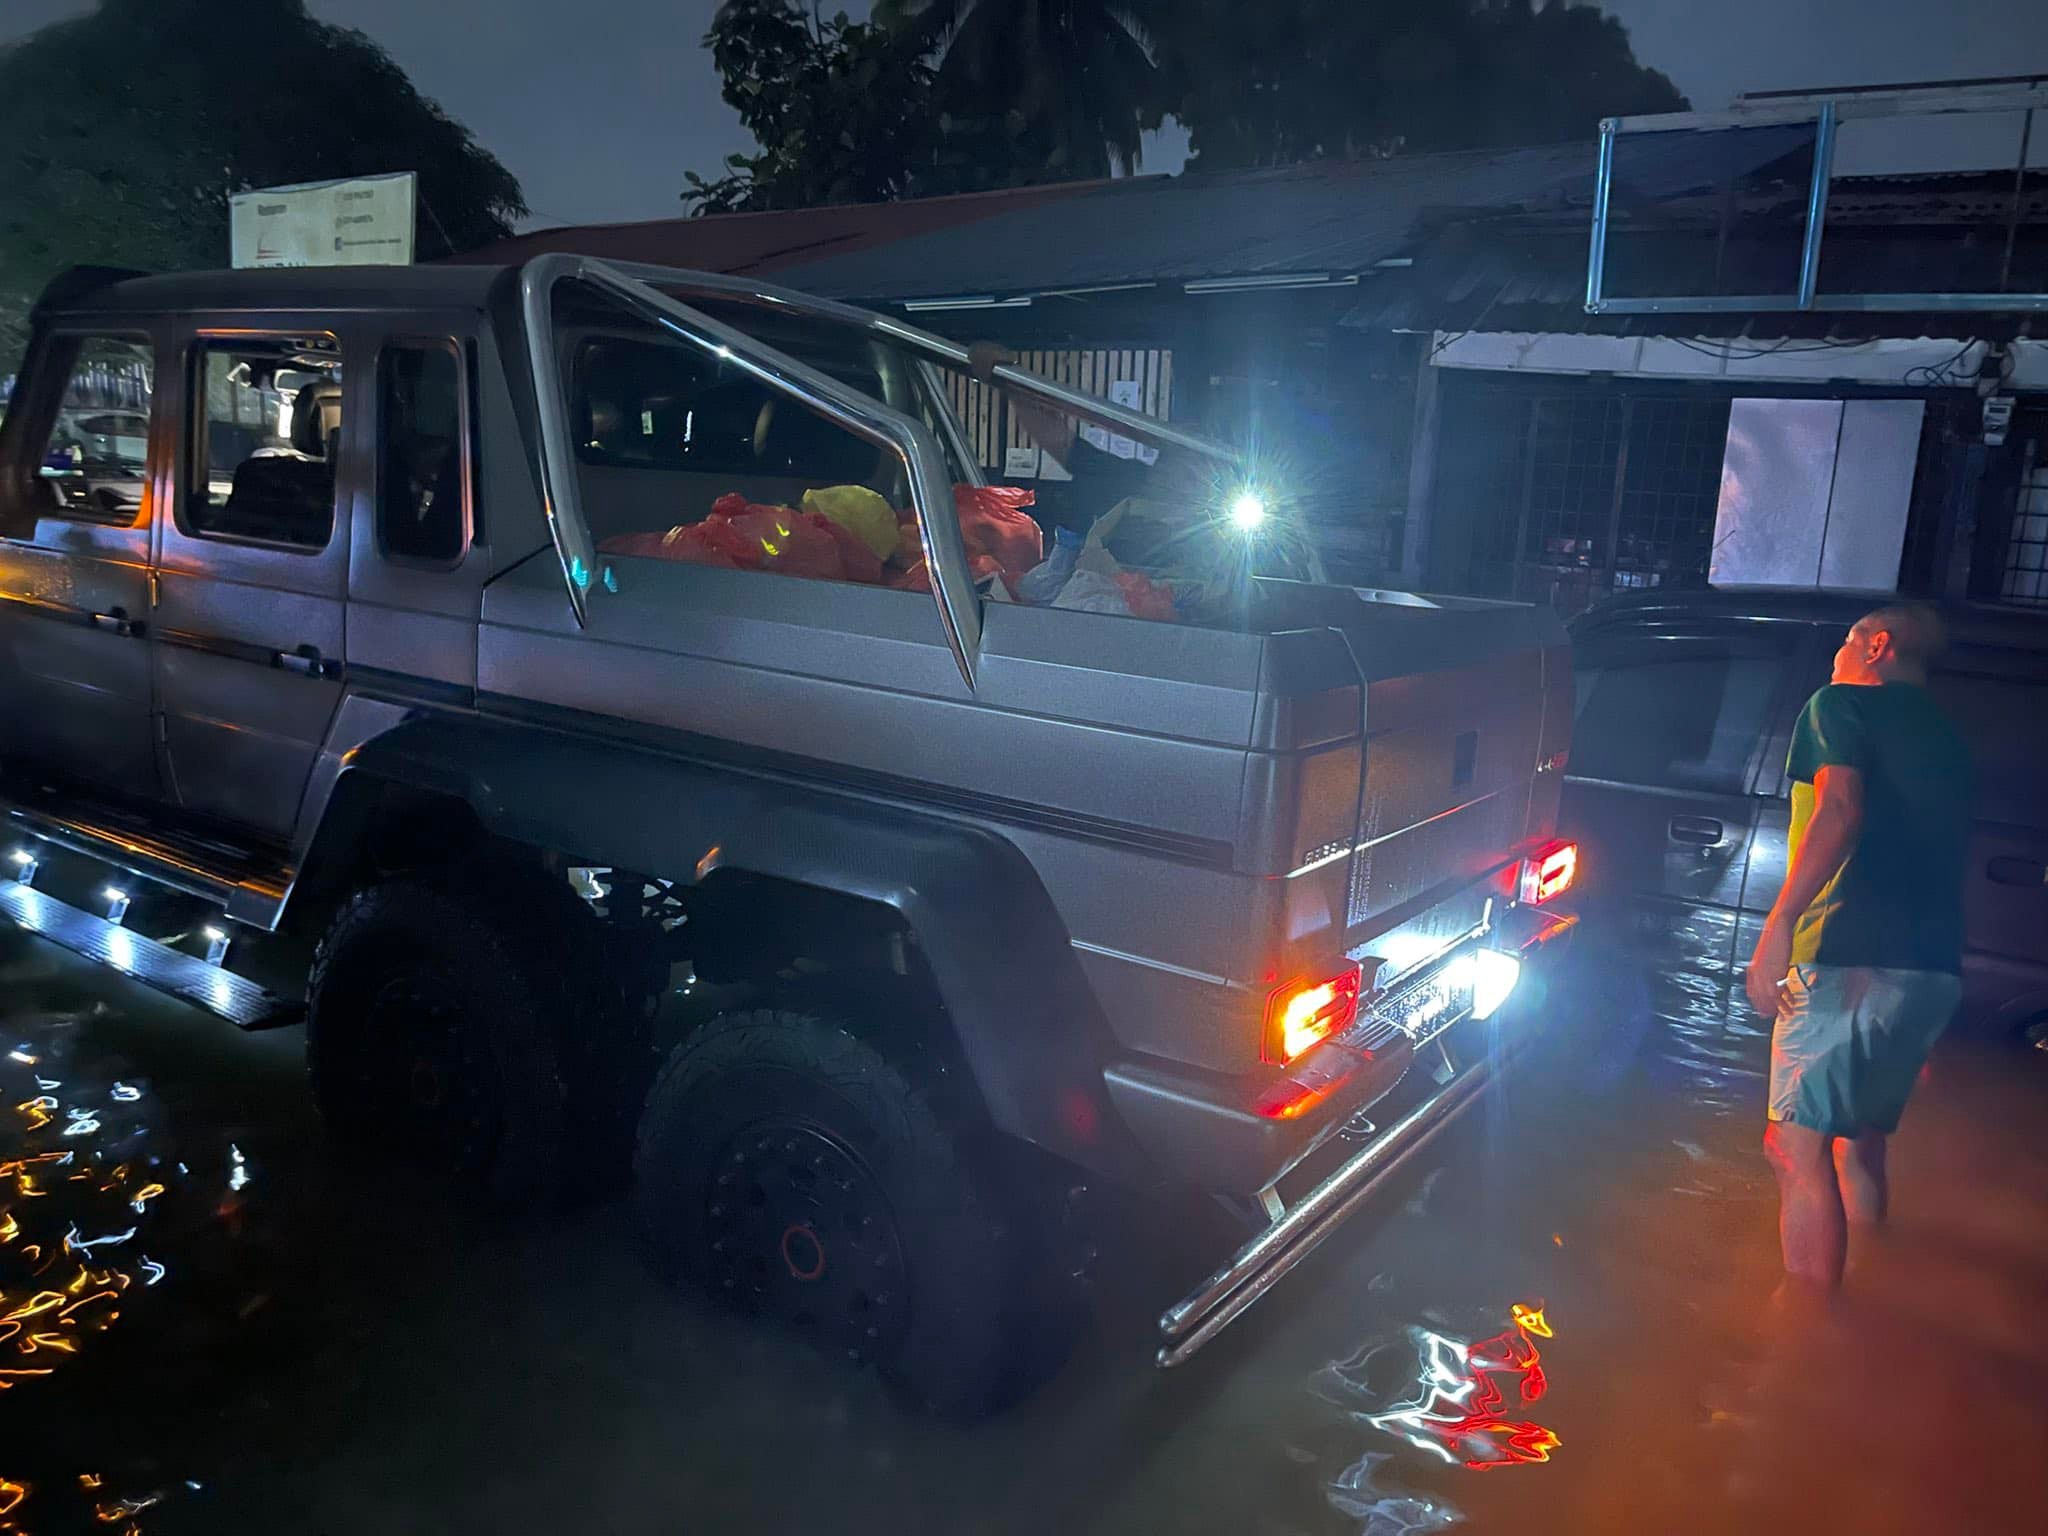 DSS Sunny's Brabus G700 6X6 fording through flood waters in Shah Alam.